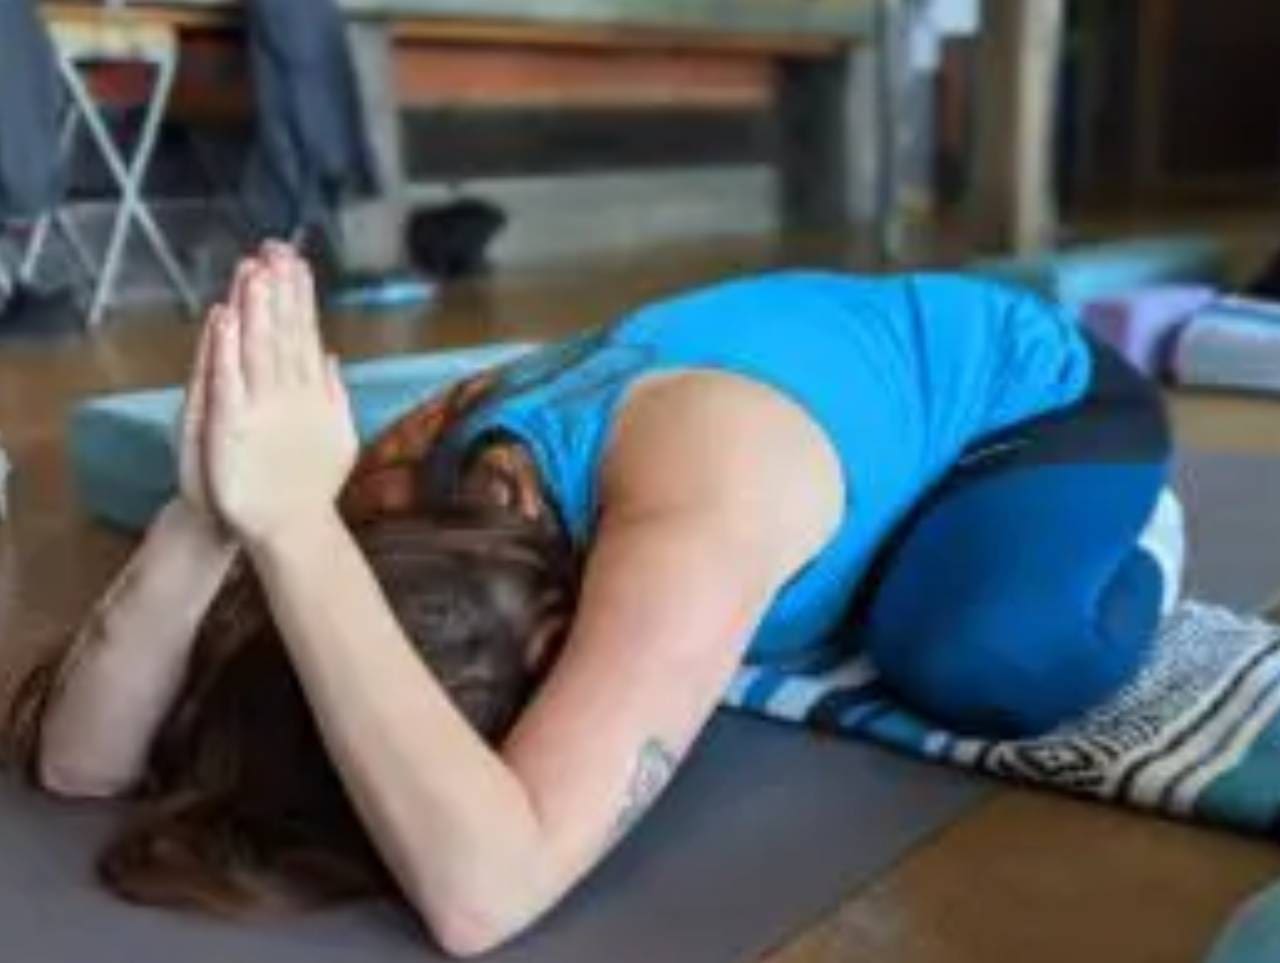 A Woman in Blue Tank Top Doing Yoga